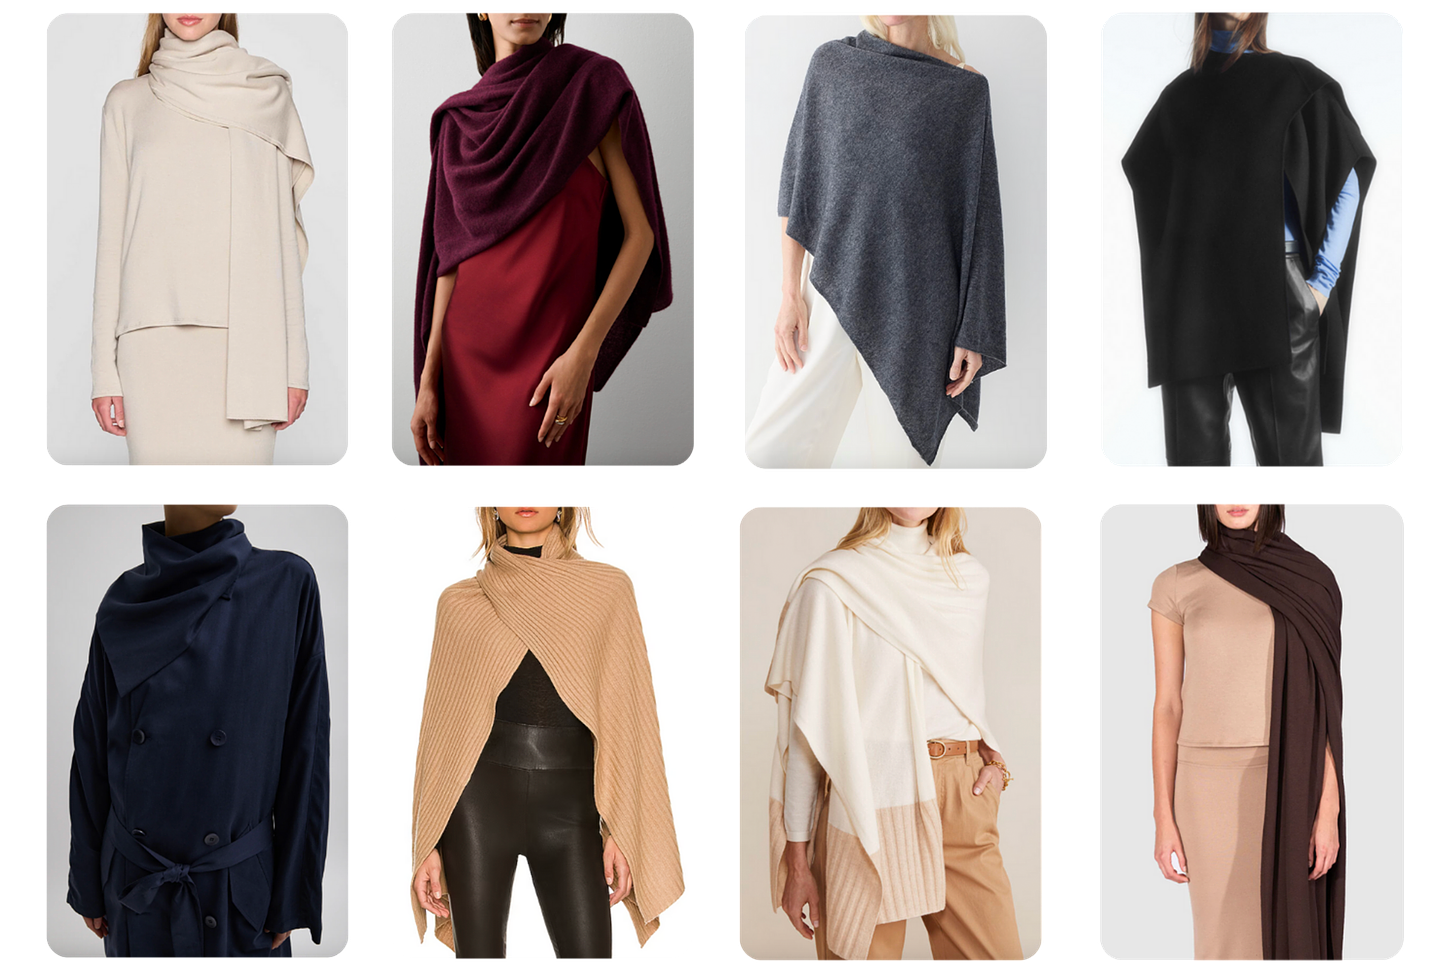 Selection of pashminas from Bleusalt, J. Crew and other retailers.